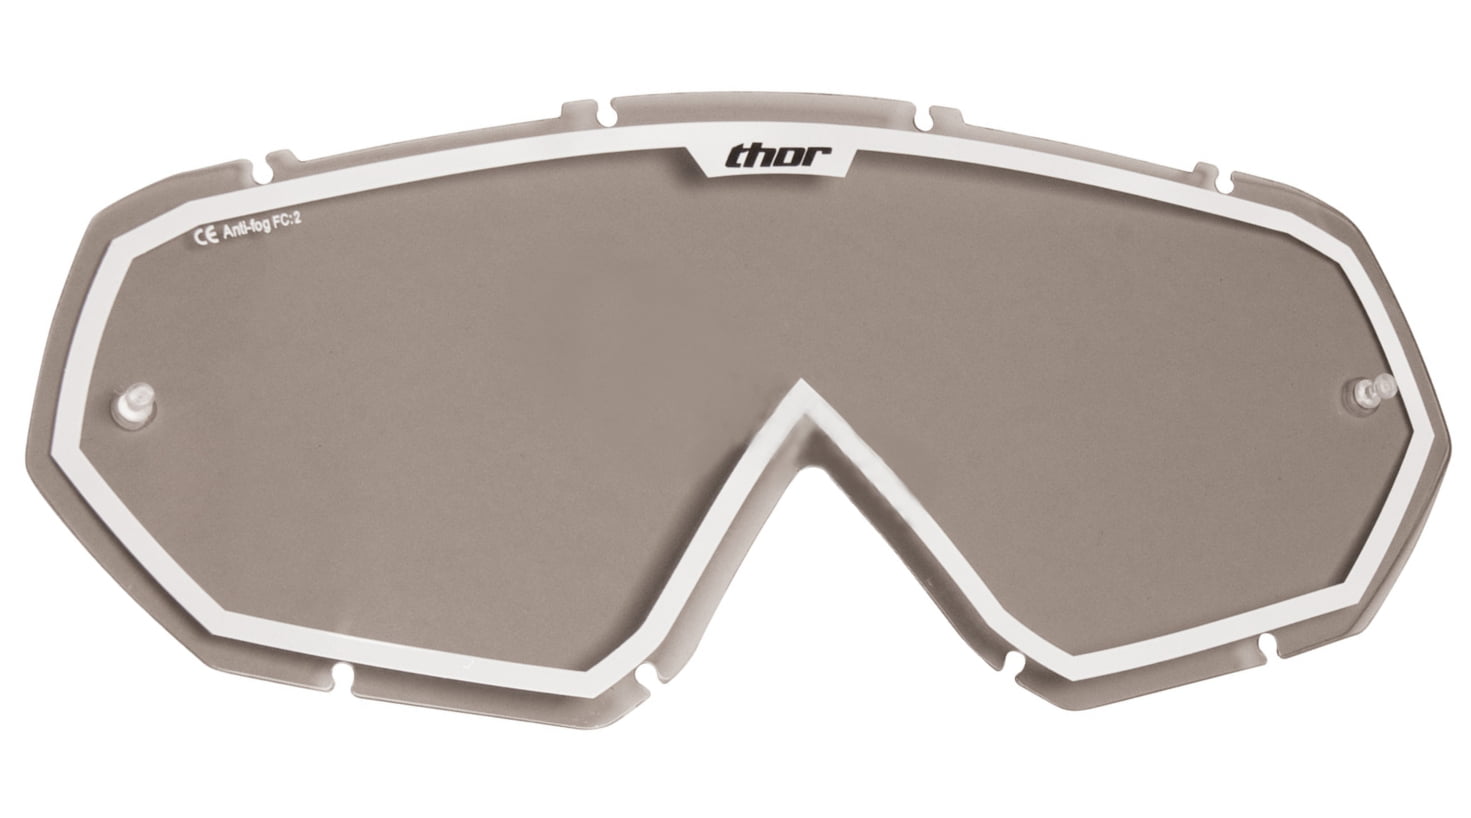 Thor Sniper Pro Replacement Tear-Off Goggles Lens Eyewear Conquer Combat Smoke